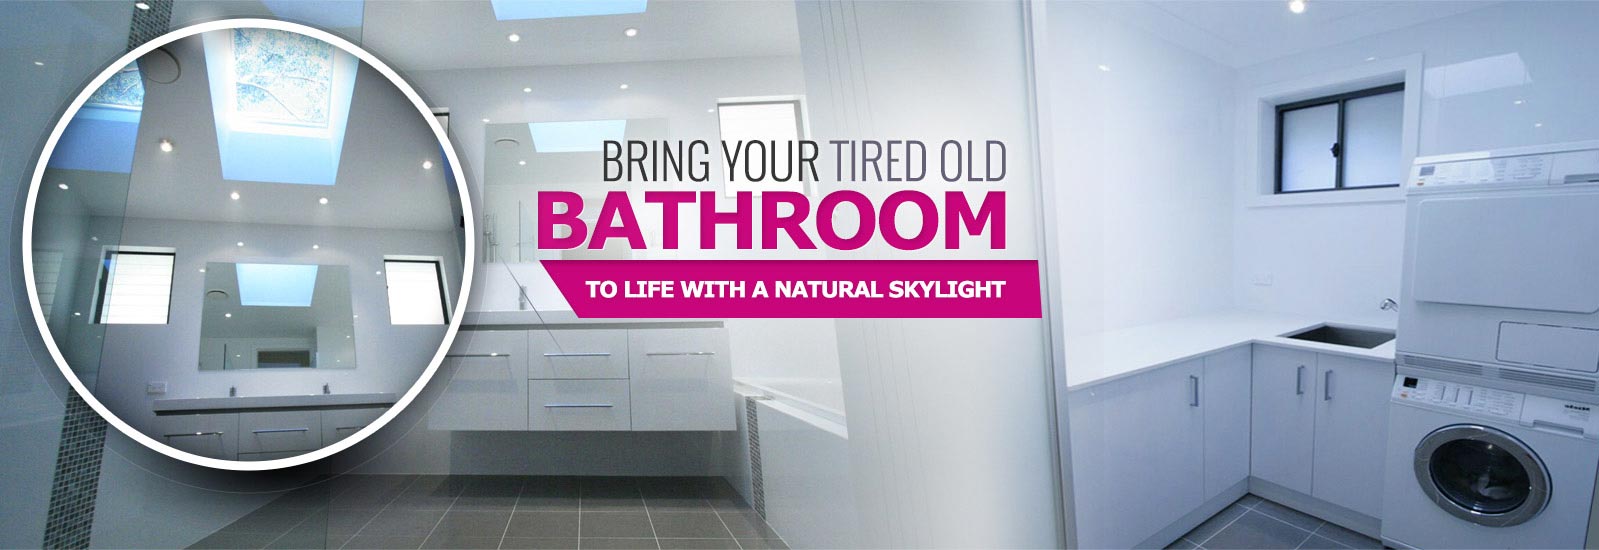 Bring Your Tired old bathroom to life with a natural skylight